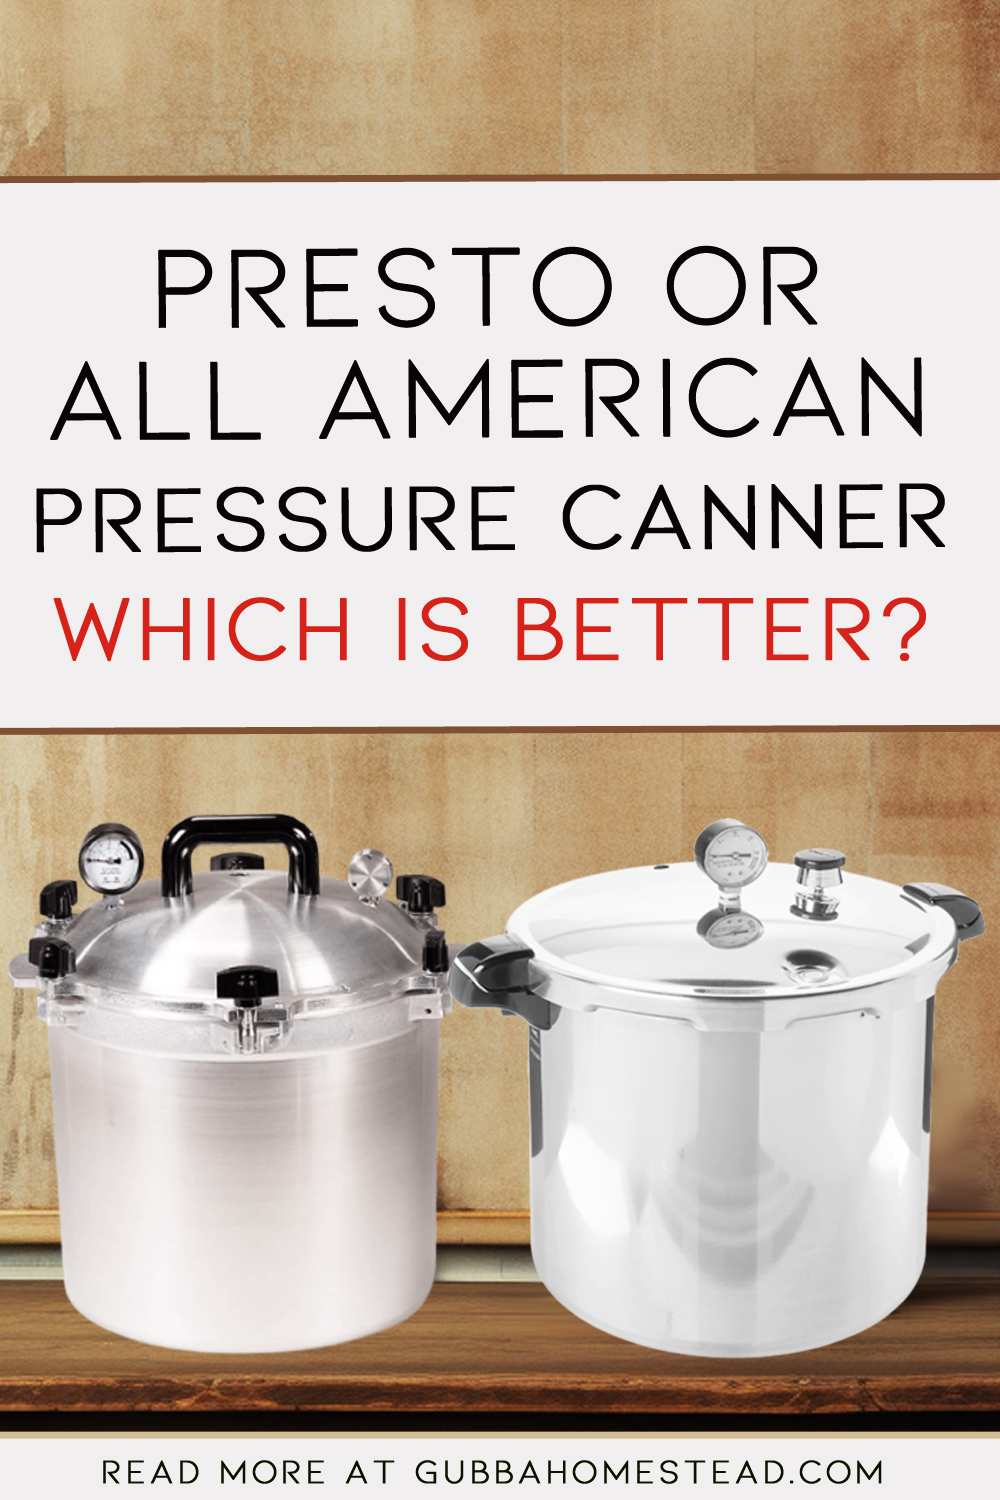 Presto Pressure Canner or All American Pressure Canner: Which is Better?